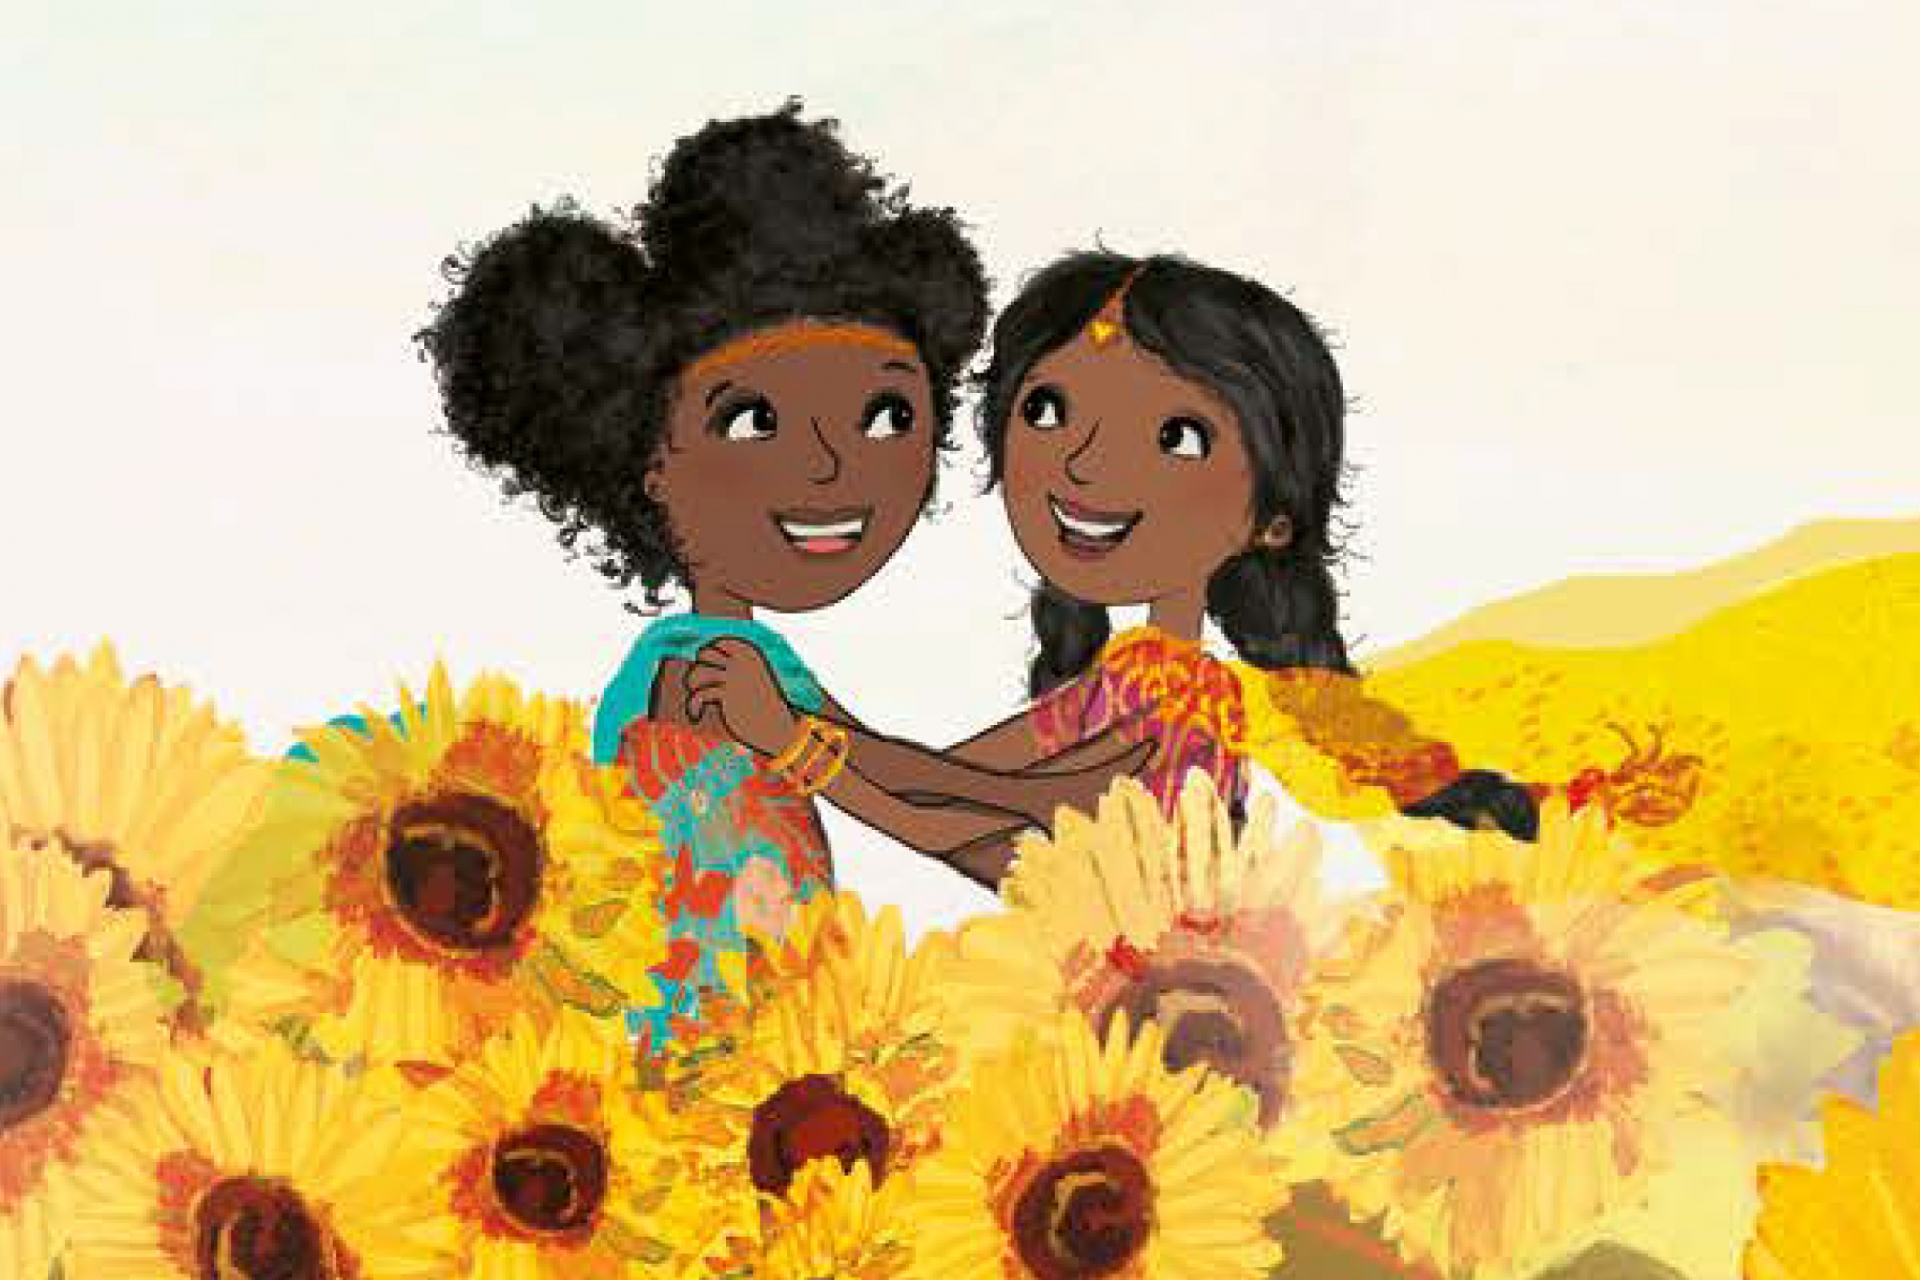 Monkia Singh Gangotra addresses colourism in her debut picture book, Sunflower Sisters